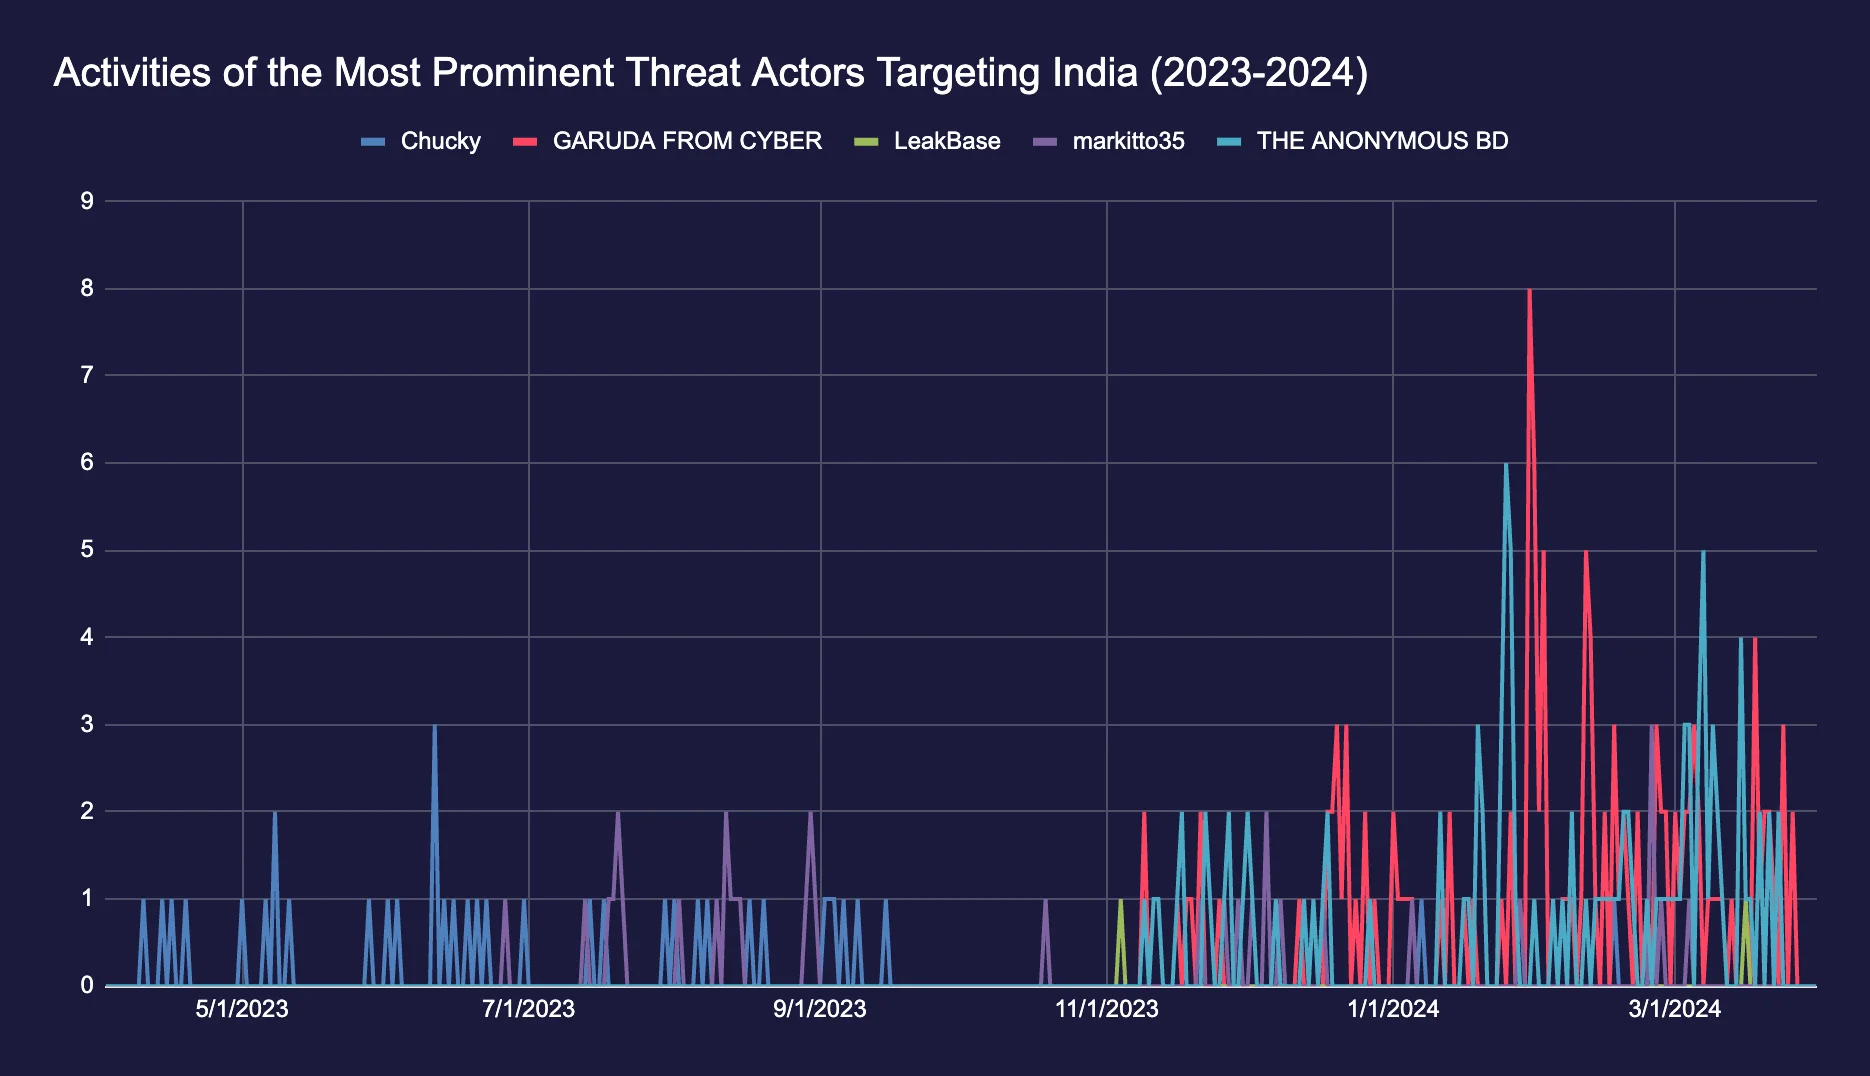 Threat actor activity in India grows as election dates are approaching